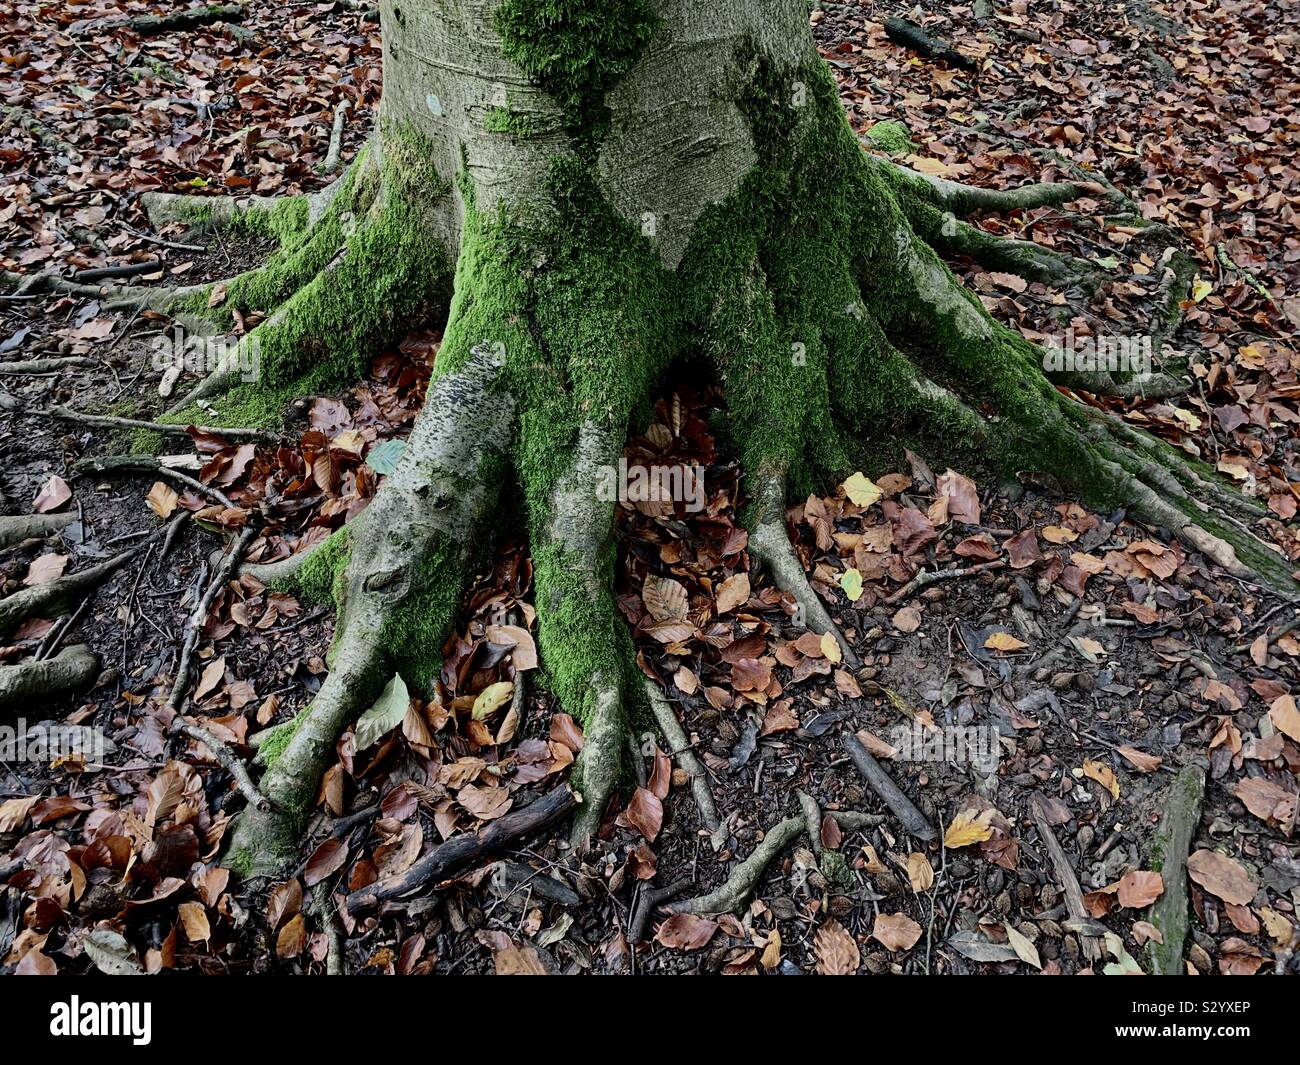 Tree roots surrounded by fallen leaves Stock Photo